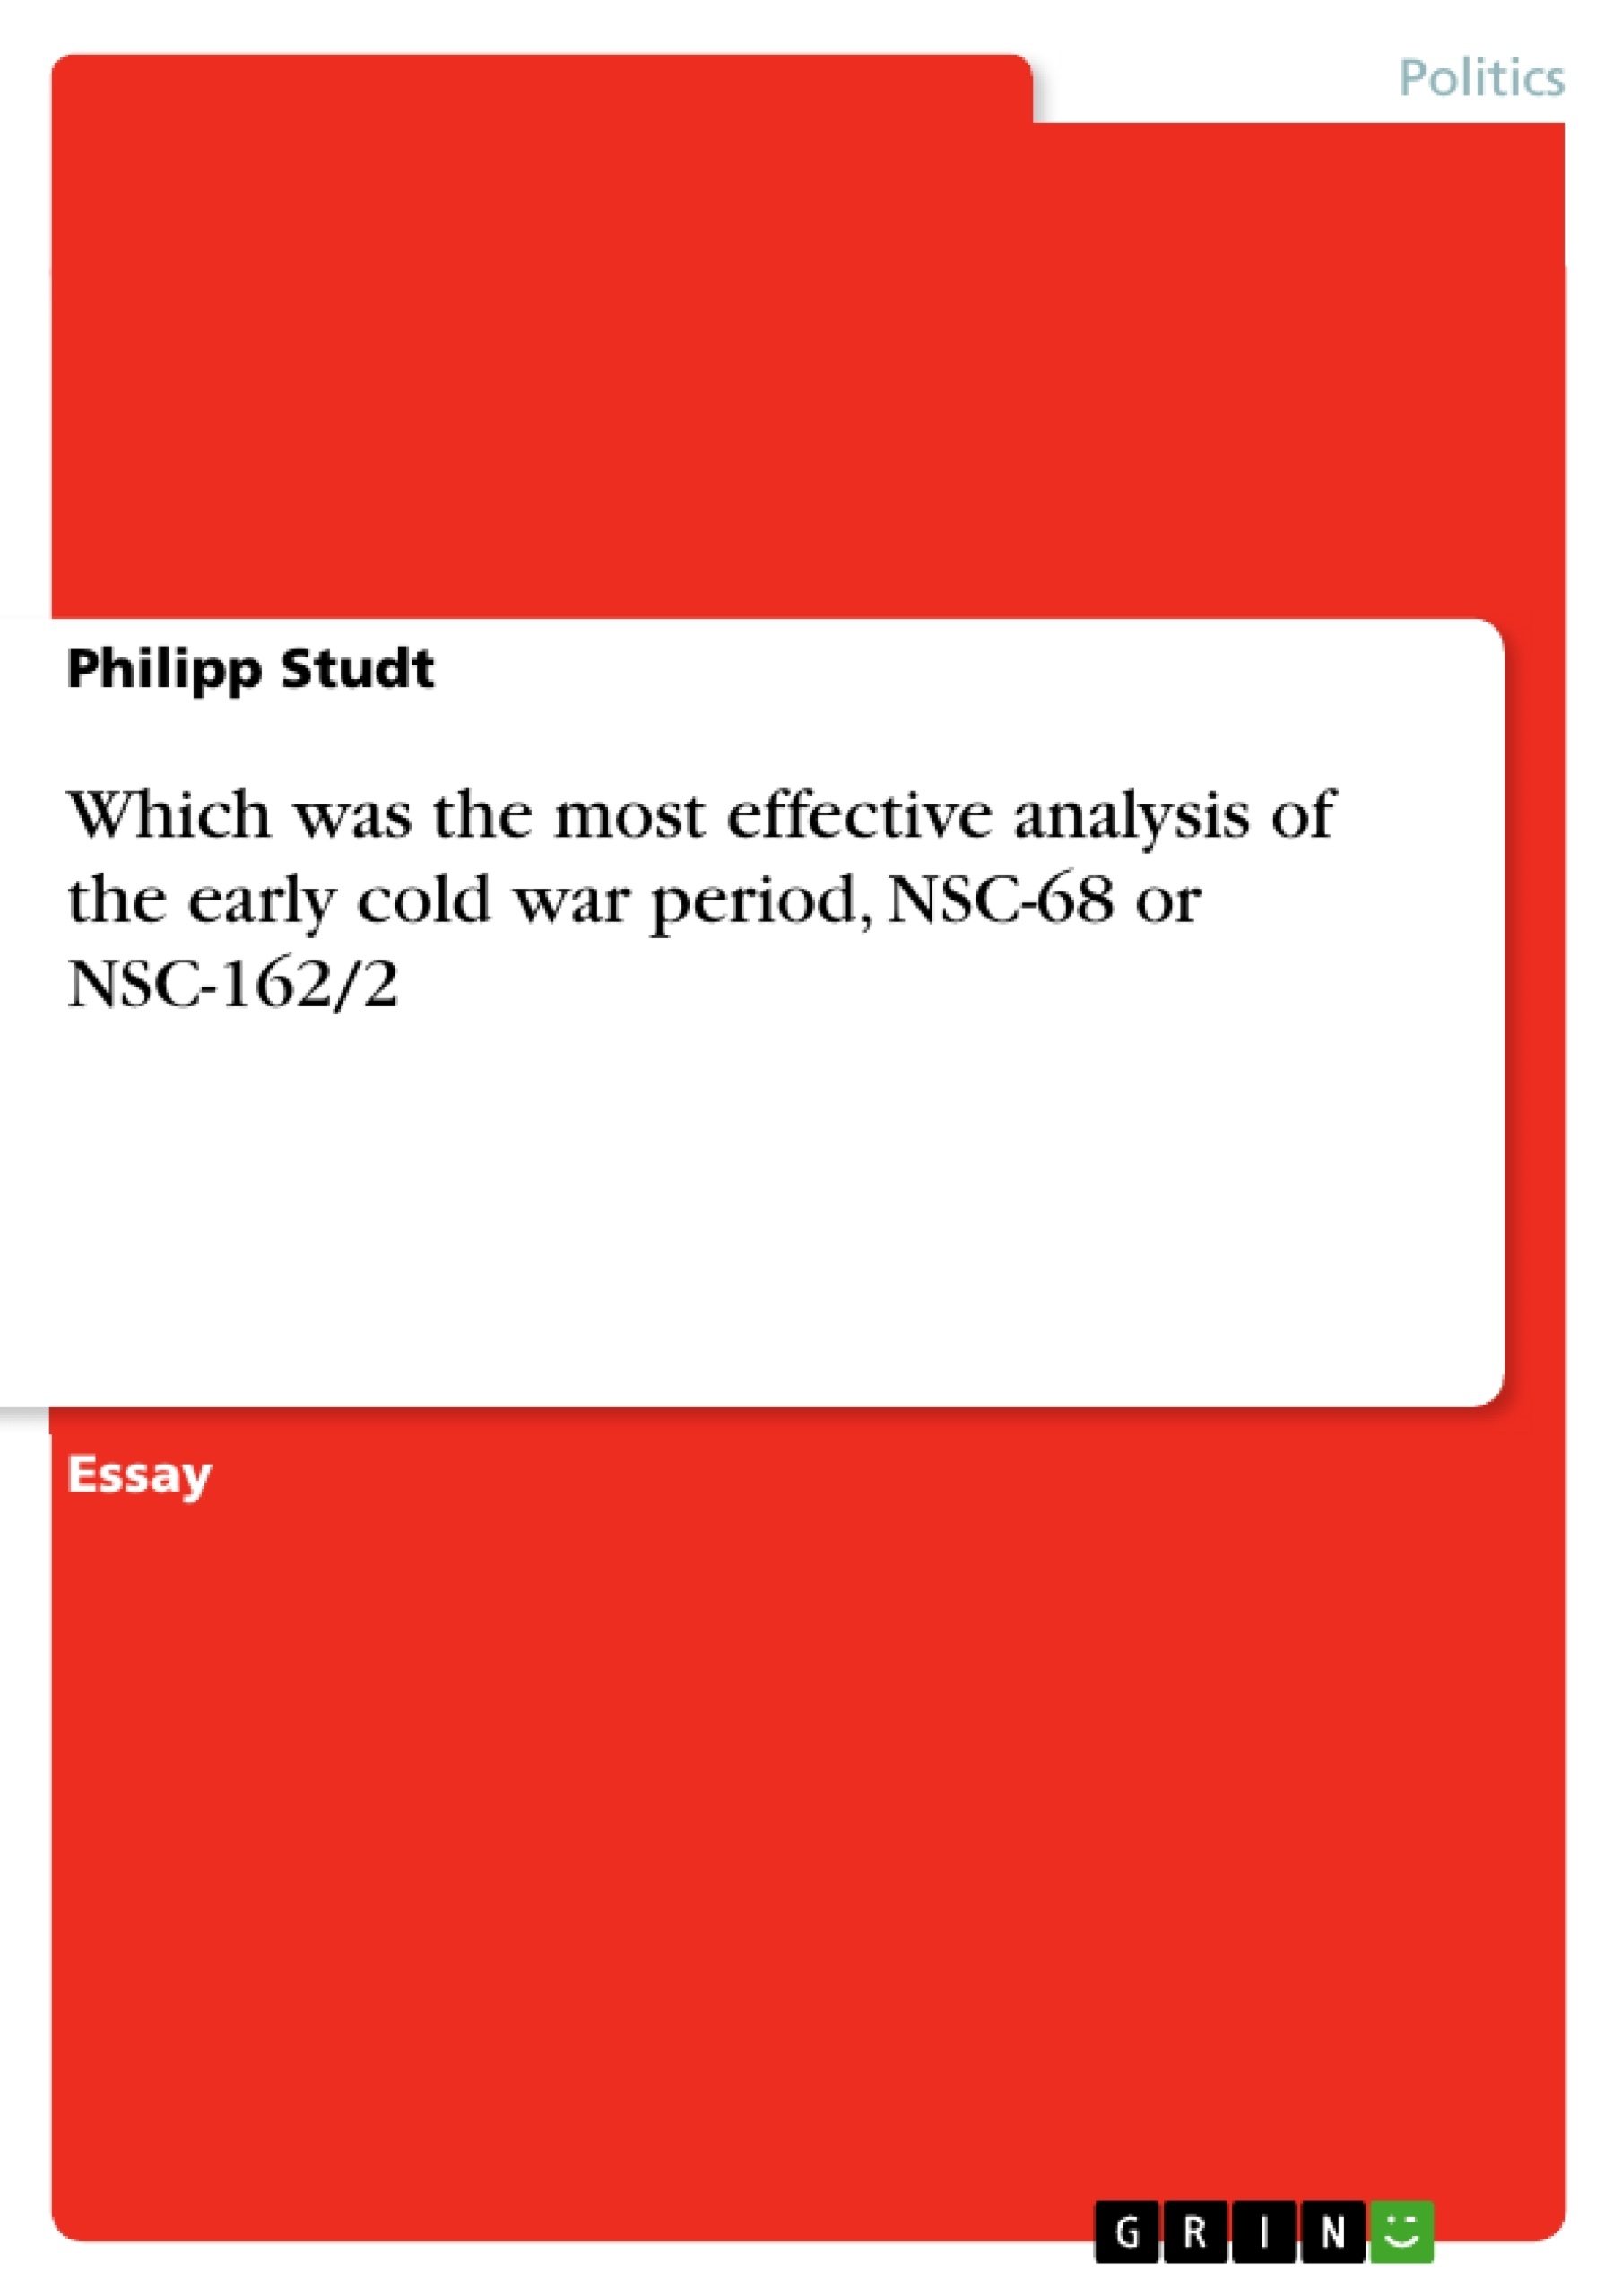 Titel: Which was the most effective analysis of the early cold war period, NSC-68 or NSC-162/2